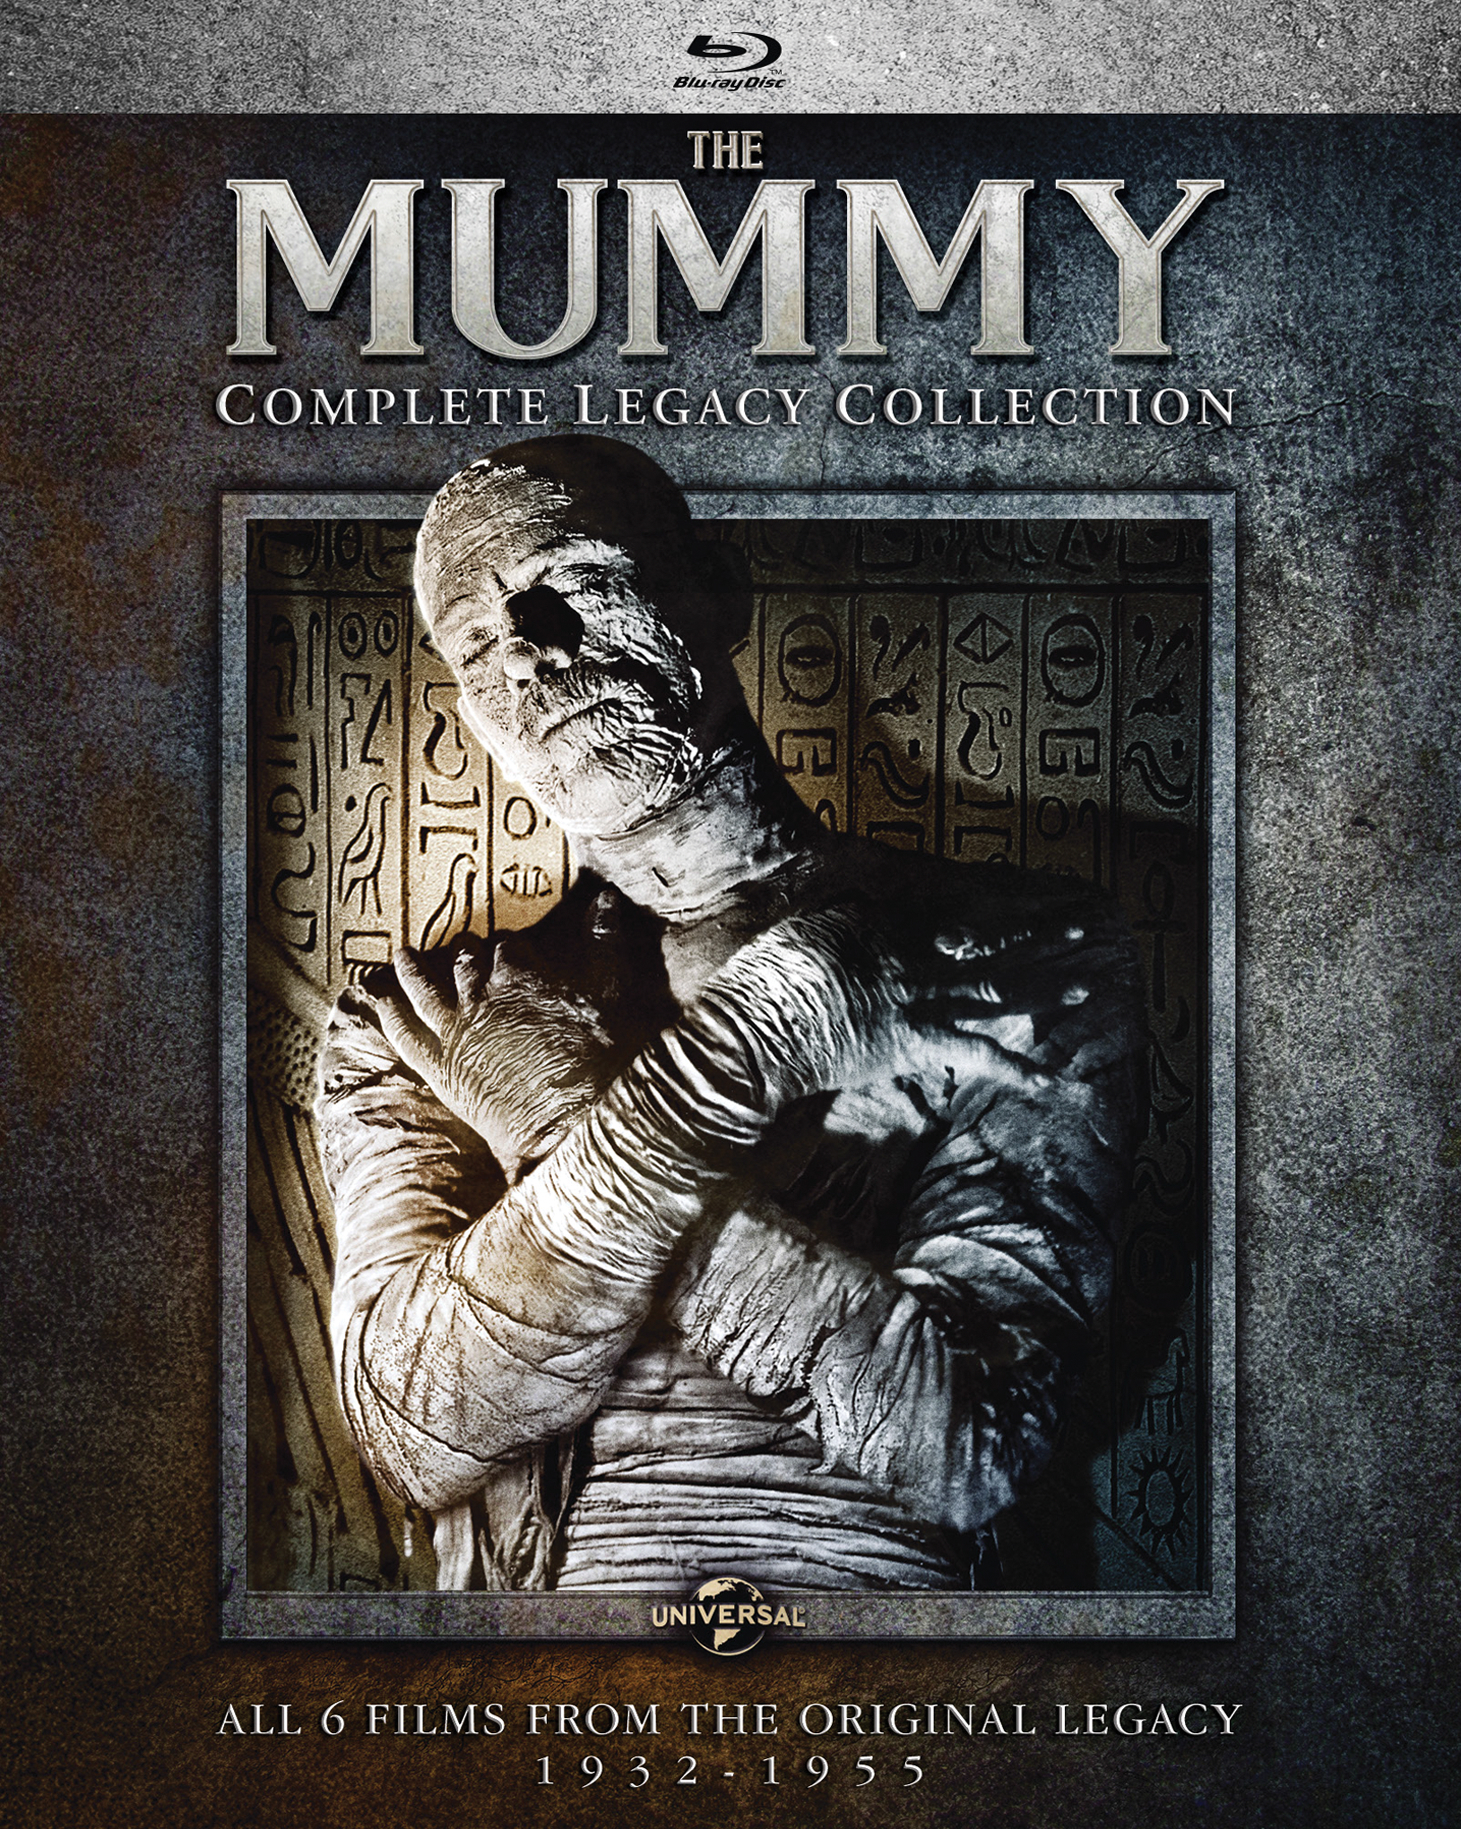 The Mummy: Complete Legacy Collection (Blu-ray Set) - Blu-ray [ 1955 ]  - Horror Movies On Blu-ray - Movies On GRUV